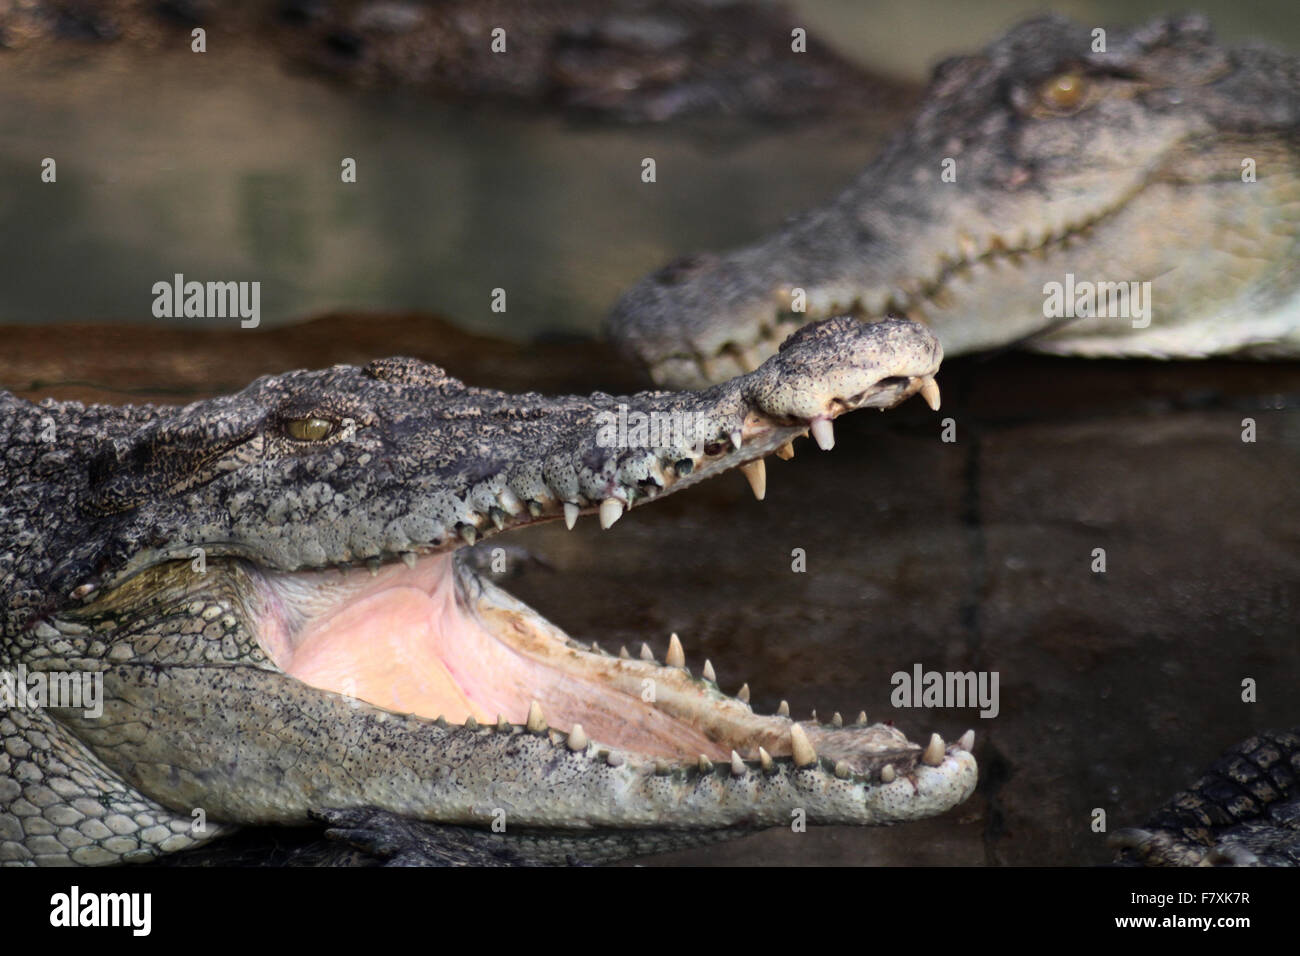 Medan, North Sumatra, Indonesia. 3rd Dec, 2015. Crocodile in captivity at mealtimes. The city of Medan is a breeding center that holds more than 2,800 crocodiles, which are also the largest crocodile habitat in the world. Last month Indonesian ministers announced plans for Crocodiles, Pirahna's and tigers to guard inmates in the country, in order to prevent escape. © Ivan Damanik/Alamy Live News Stock Photo